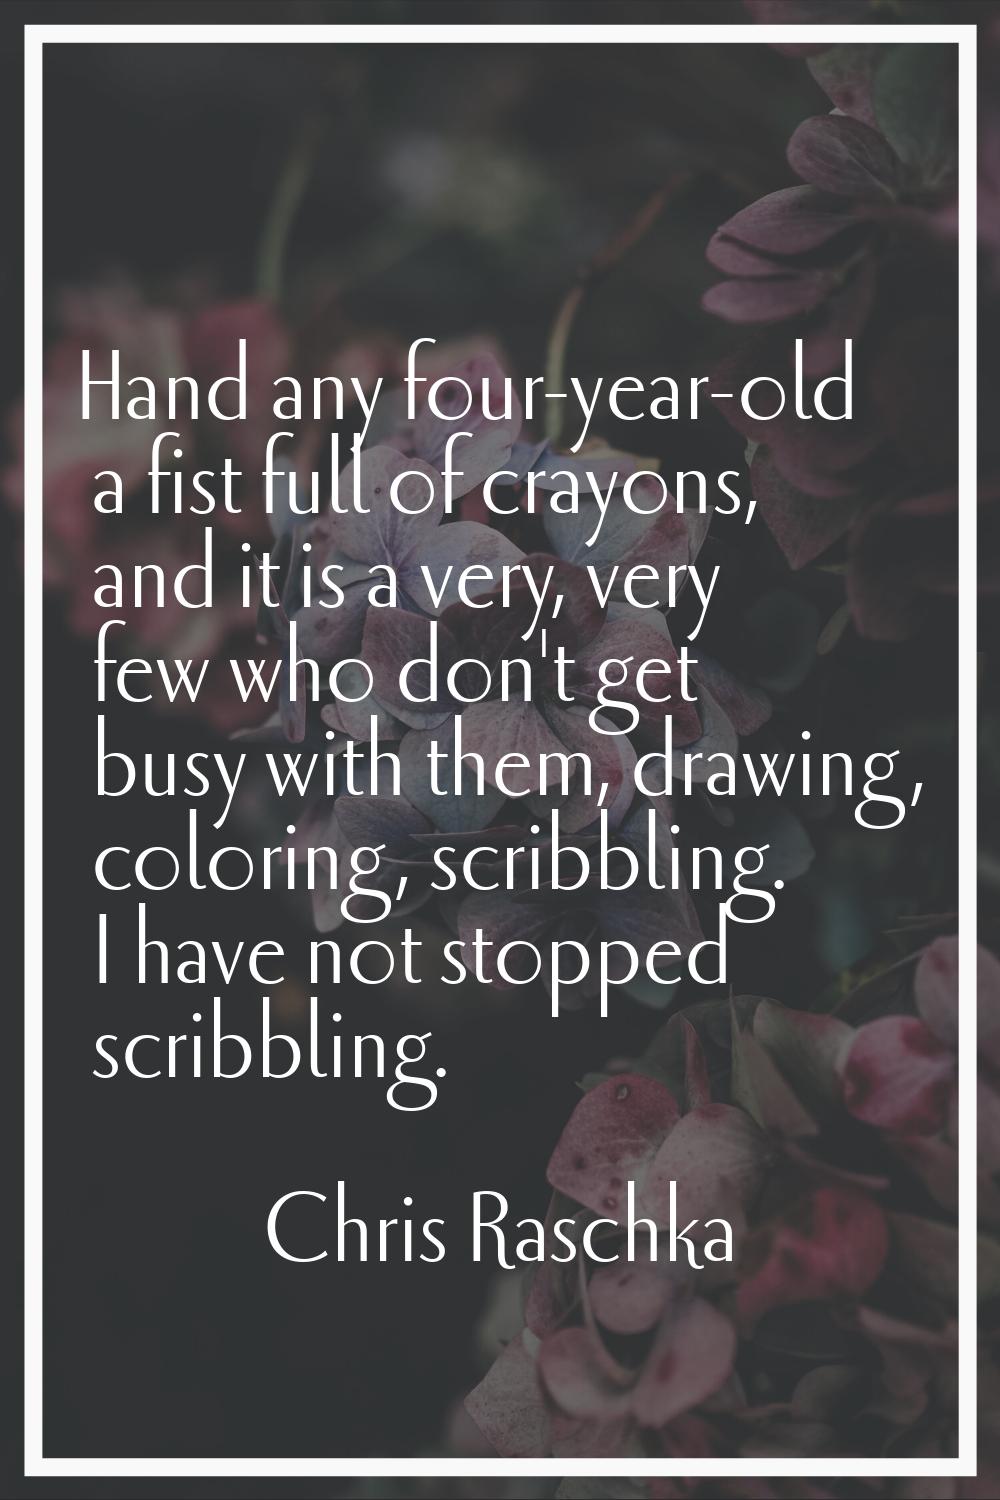 Hand any four-year-old a fist full of crayons, and it is a very, very few who don't get busy with t